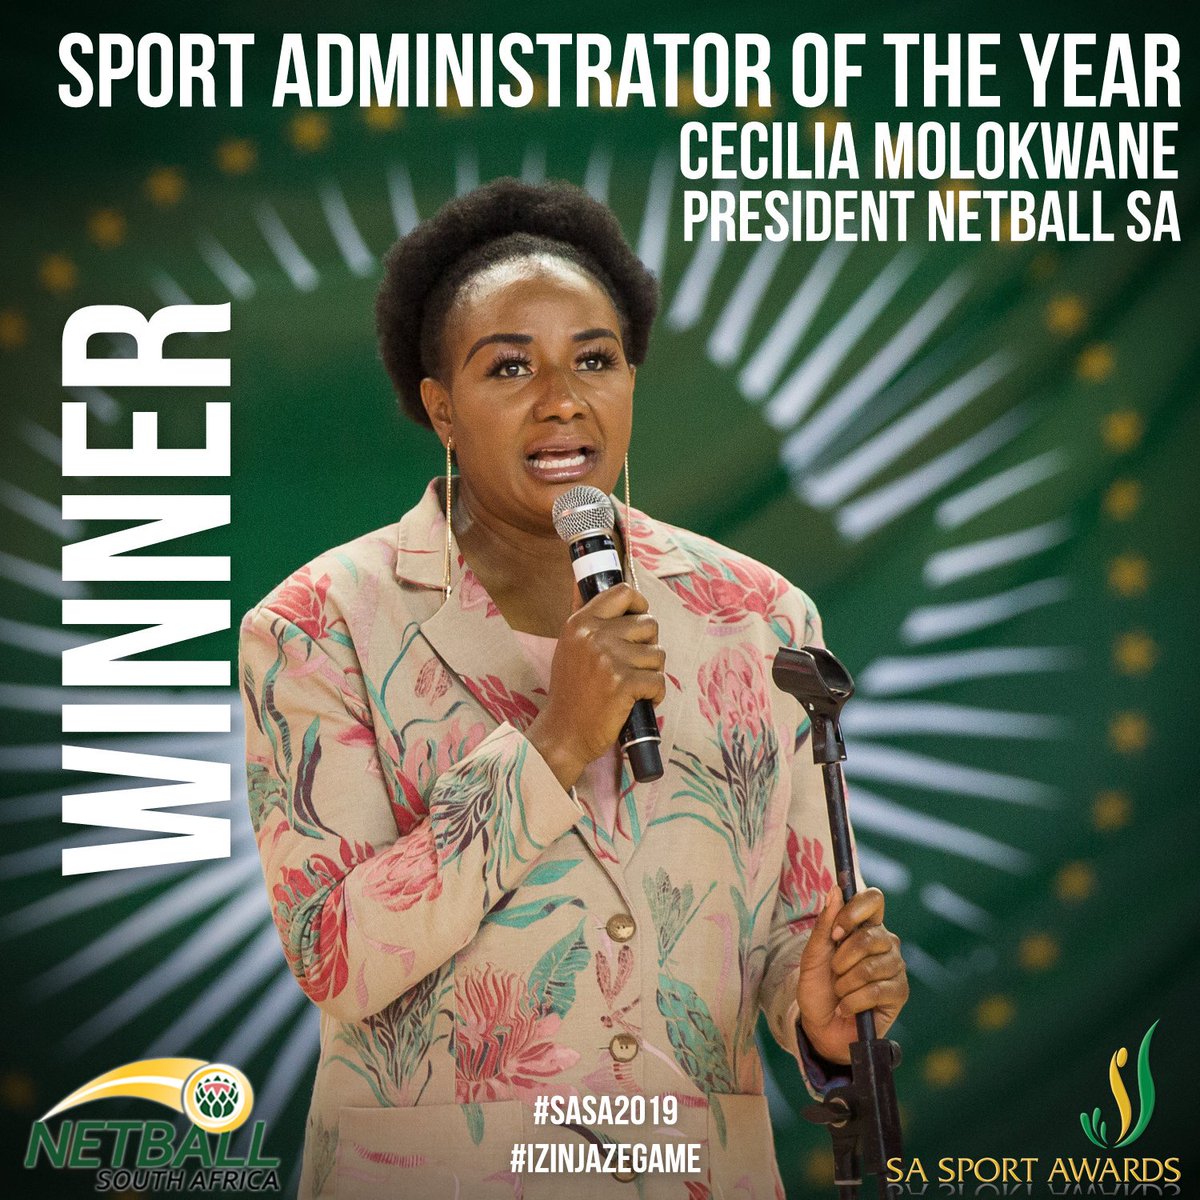 SHE'S DONE IT! Netball South Africa President Cecilia Molokwane is the 2019 @SASportAwards Sport Administrator of the Year! 🙌🏆

#SASA2019 #IzinjaZeGame